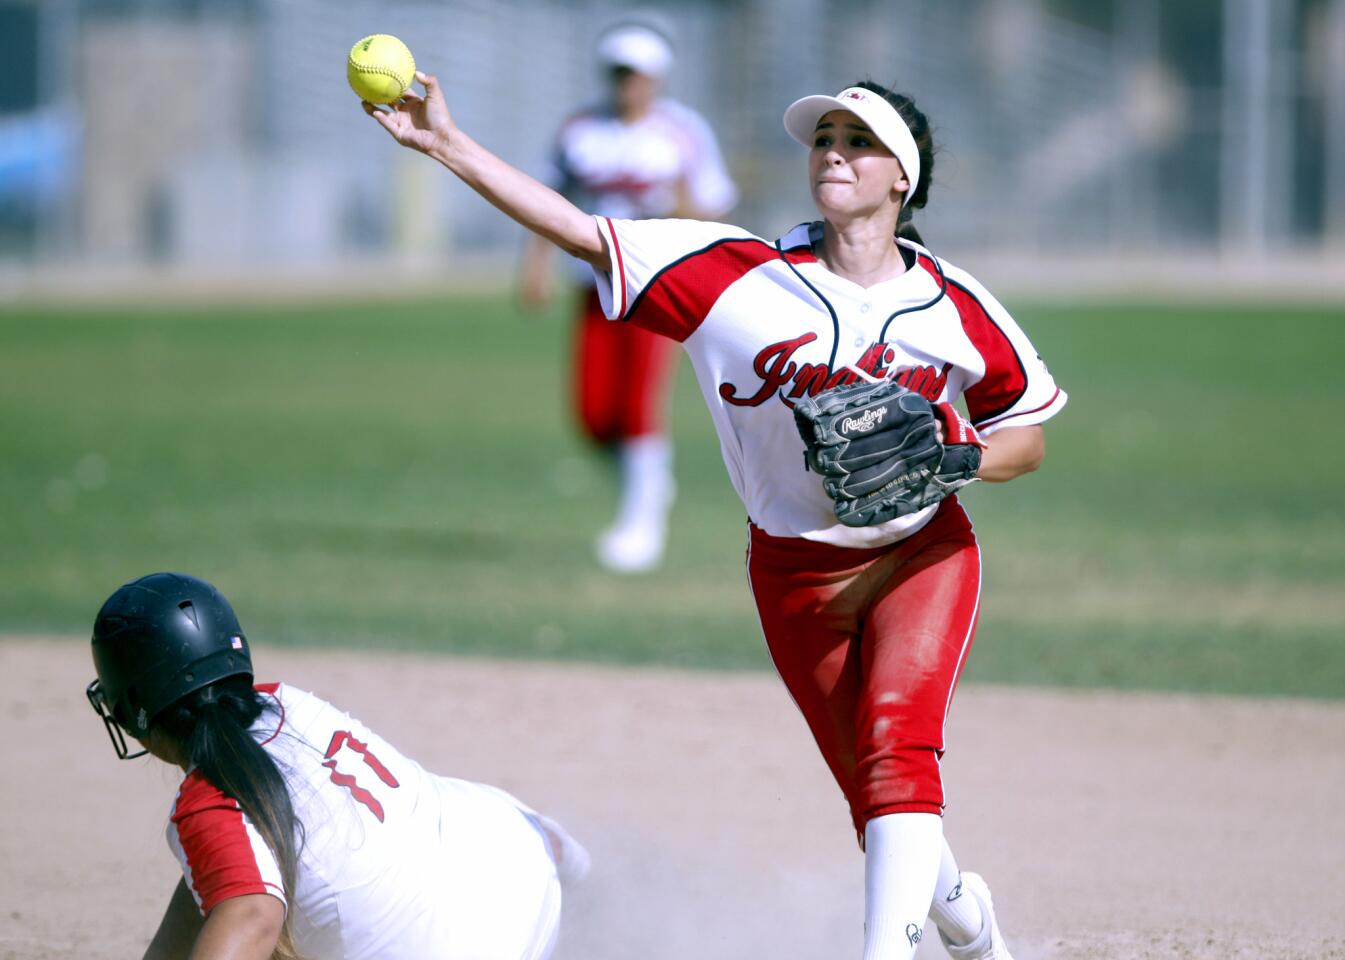 Burroughs High School softball player #23 Nikki Ricciardella gets #17 Mona Delarea out at second base and tries to turn a double play towards first base in home game vs. Glendale High School, at Olive Park in Burbank on Tuesday, April 25, 2017.